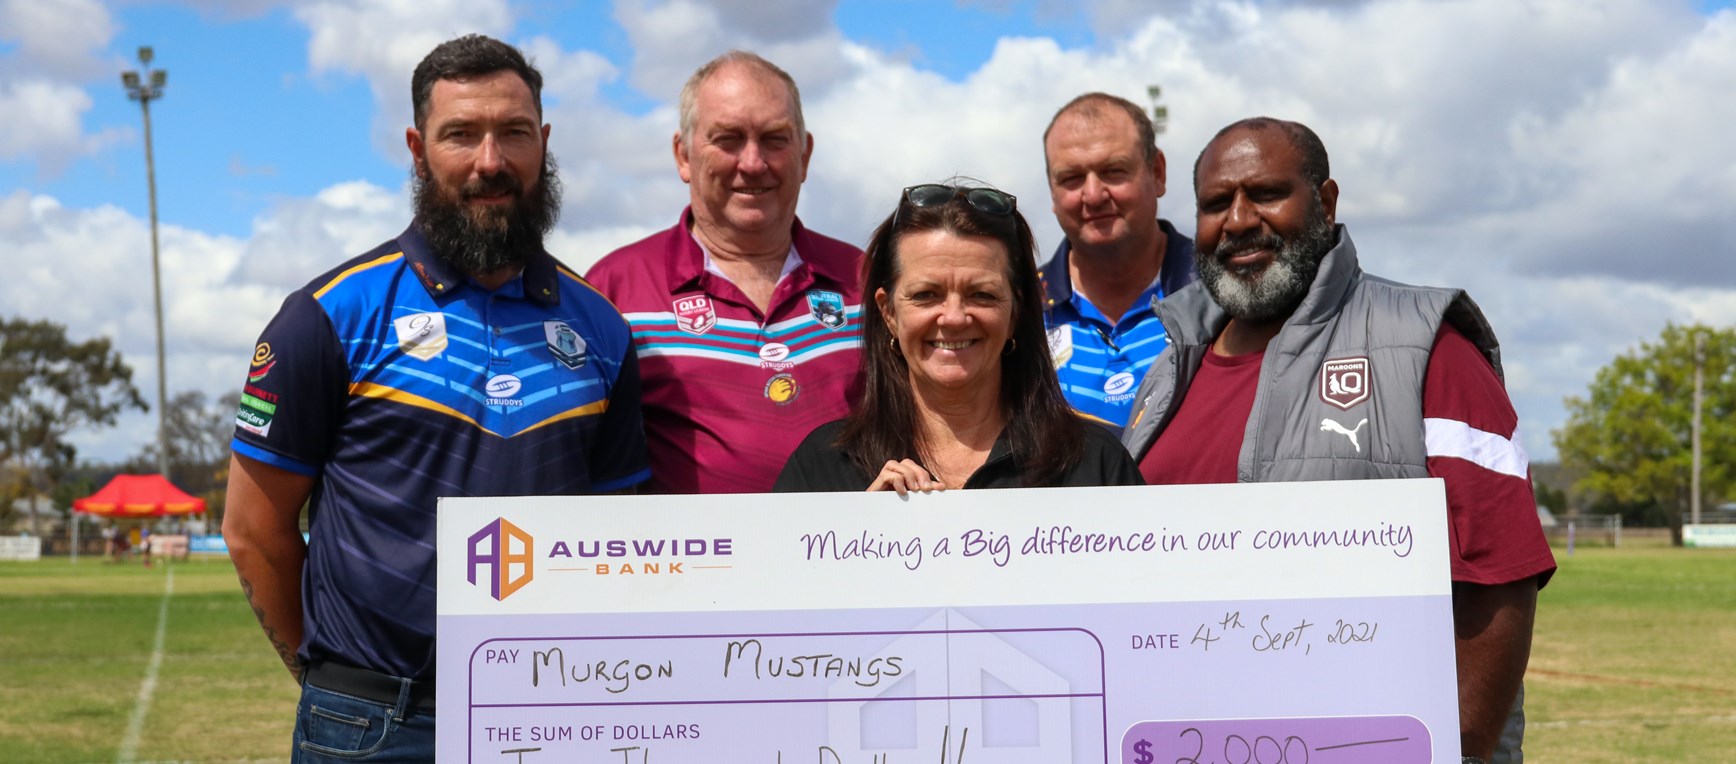 In pictures: Murgon celebrates Auswide Bank Community Program of the Year